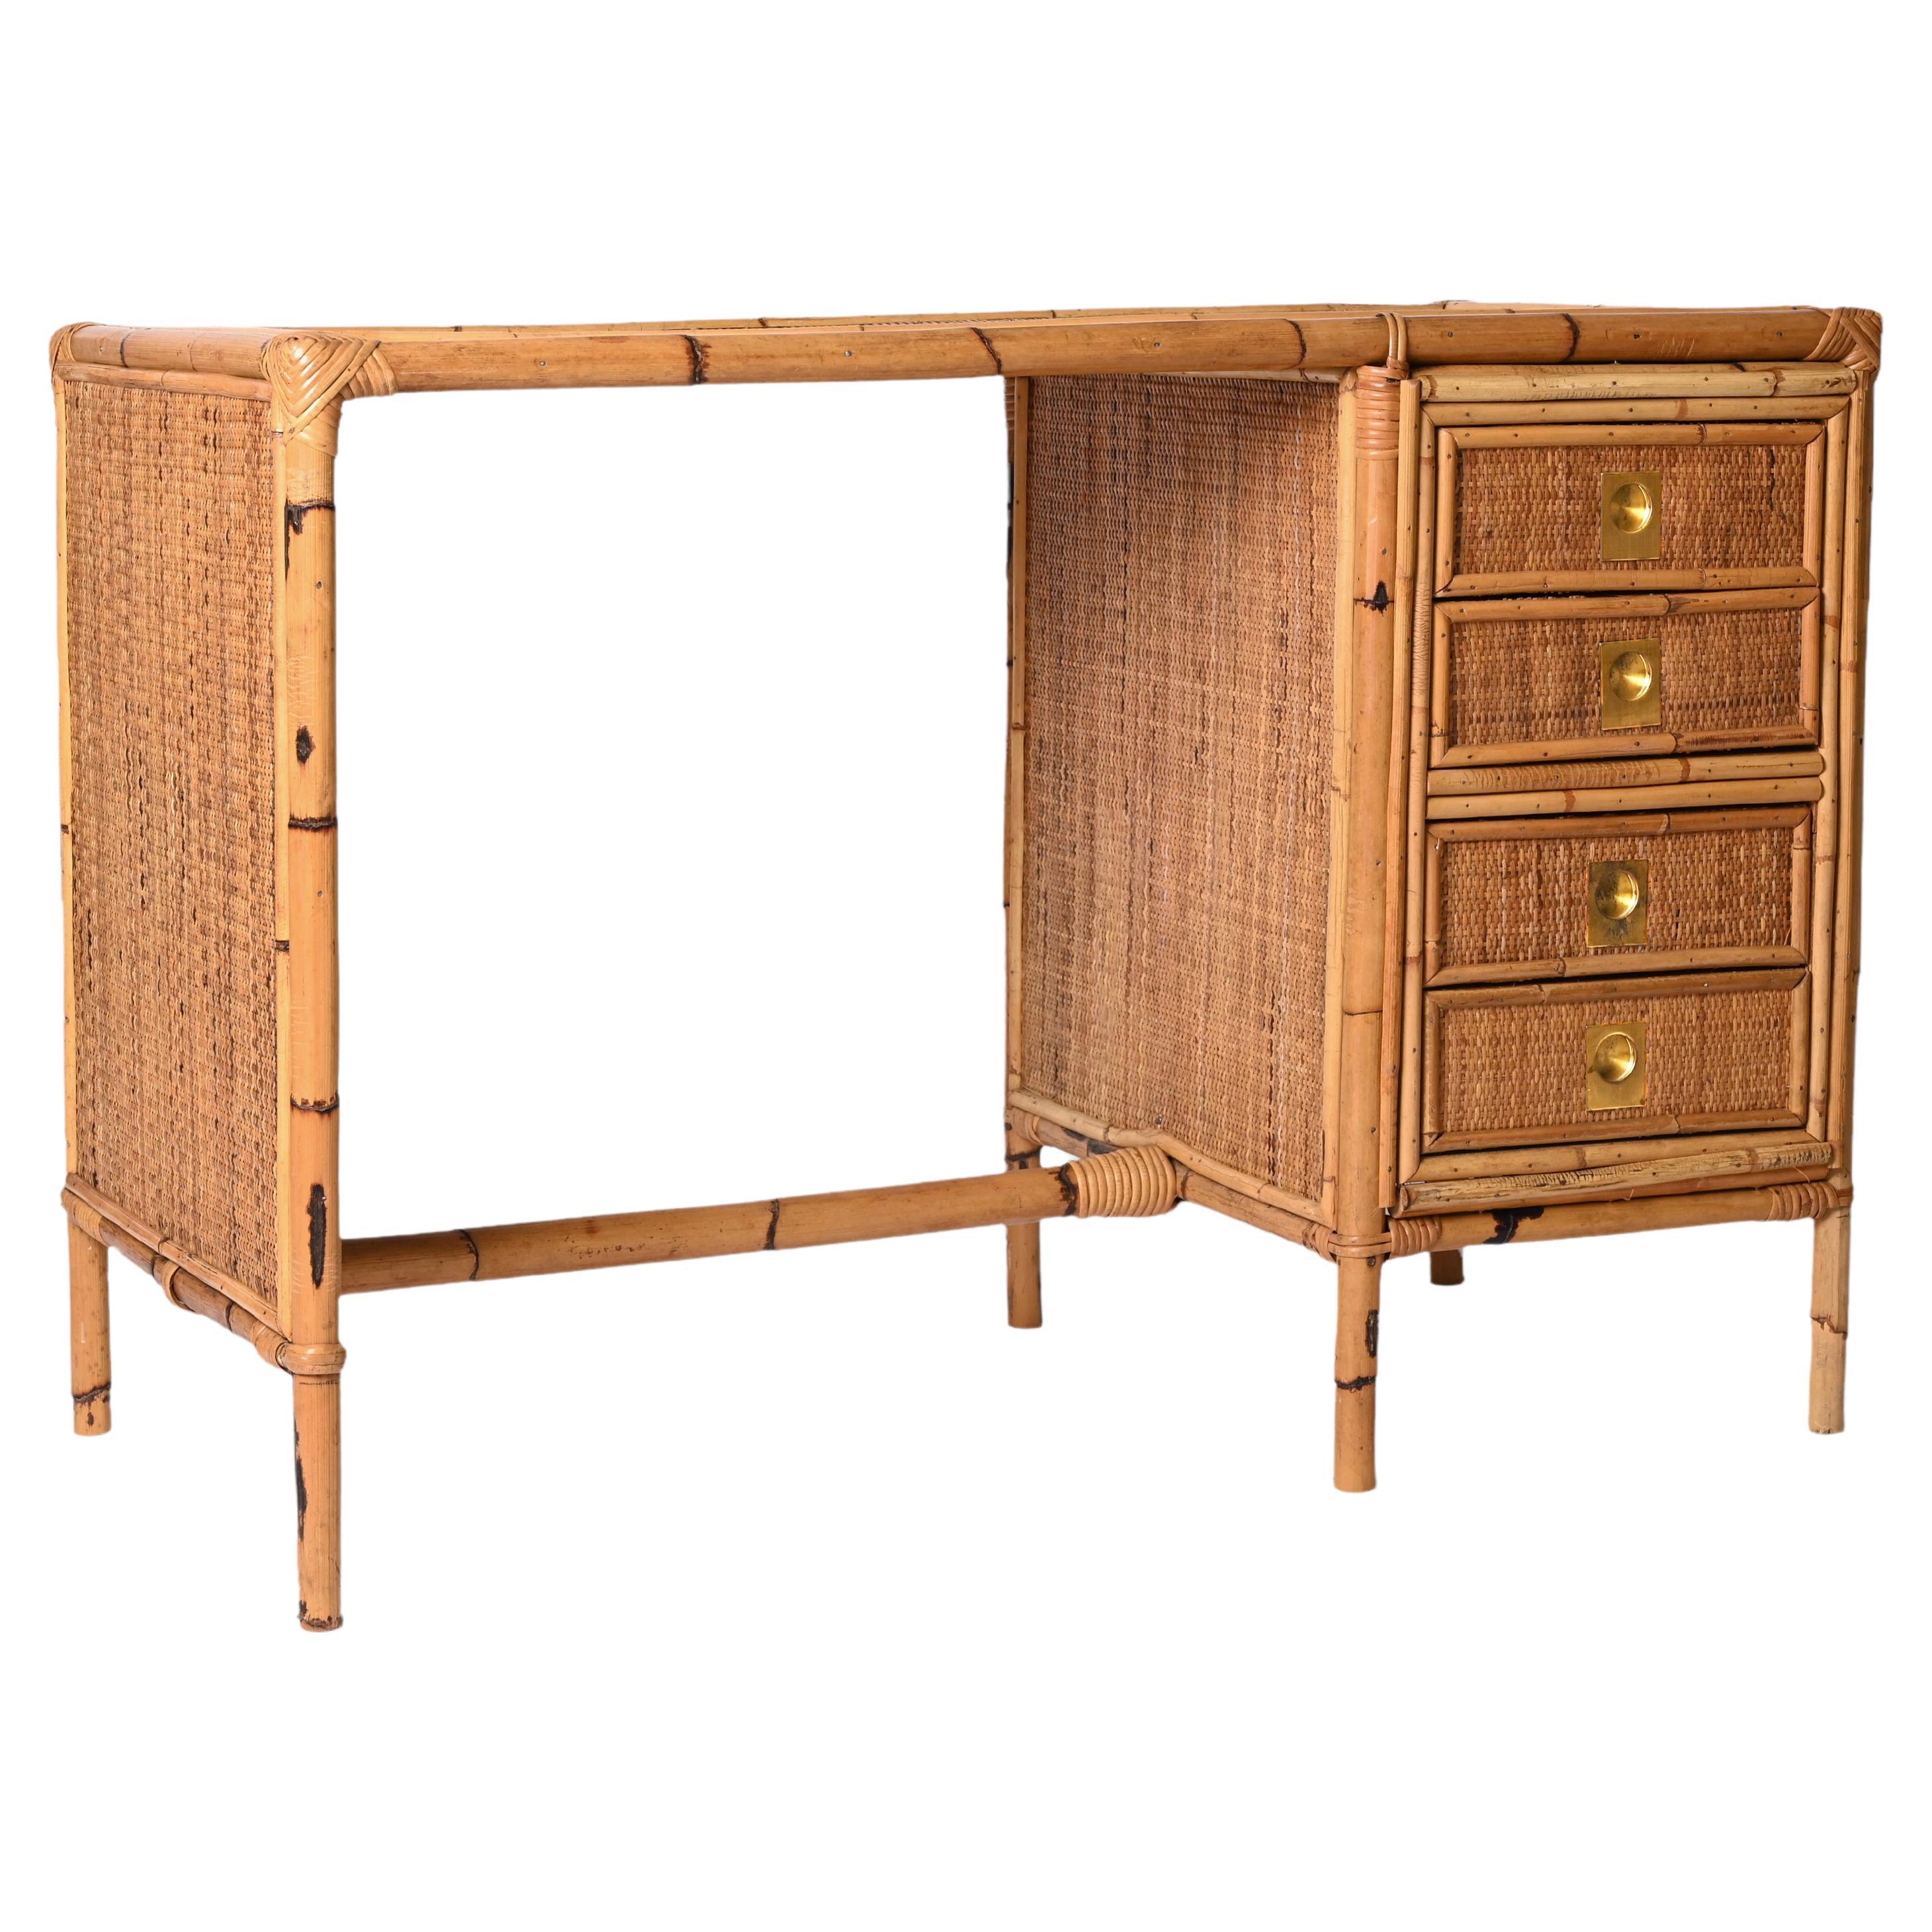 Amazing mid-century bamboo and wicker desk with drawers. This wonderful piece was designed in Italy during the 1980s.

This writing table is unique because of the materials used, bamboo and rattan, and it has four drawers.

A fantastic item that